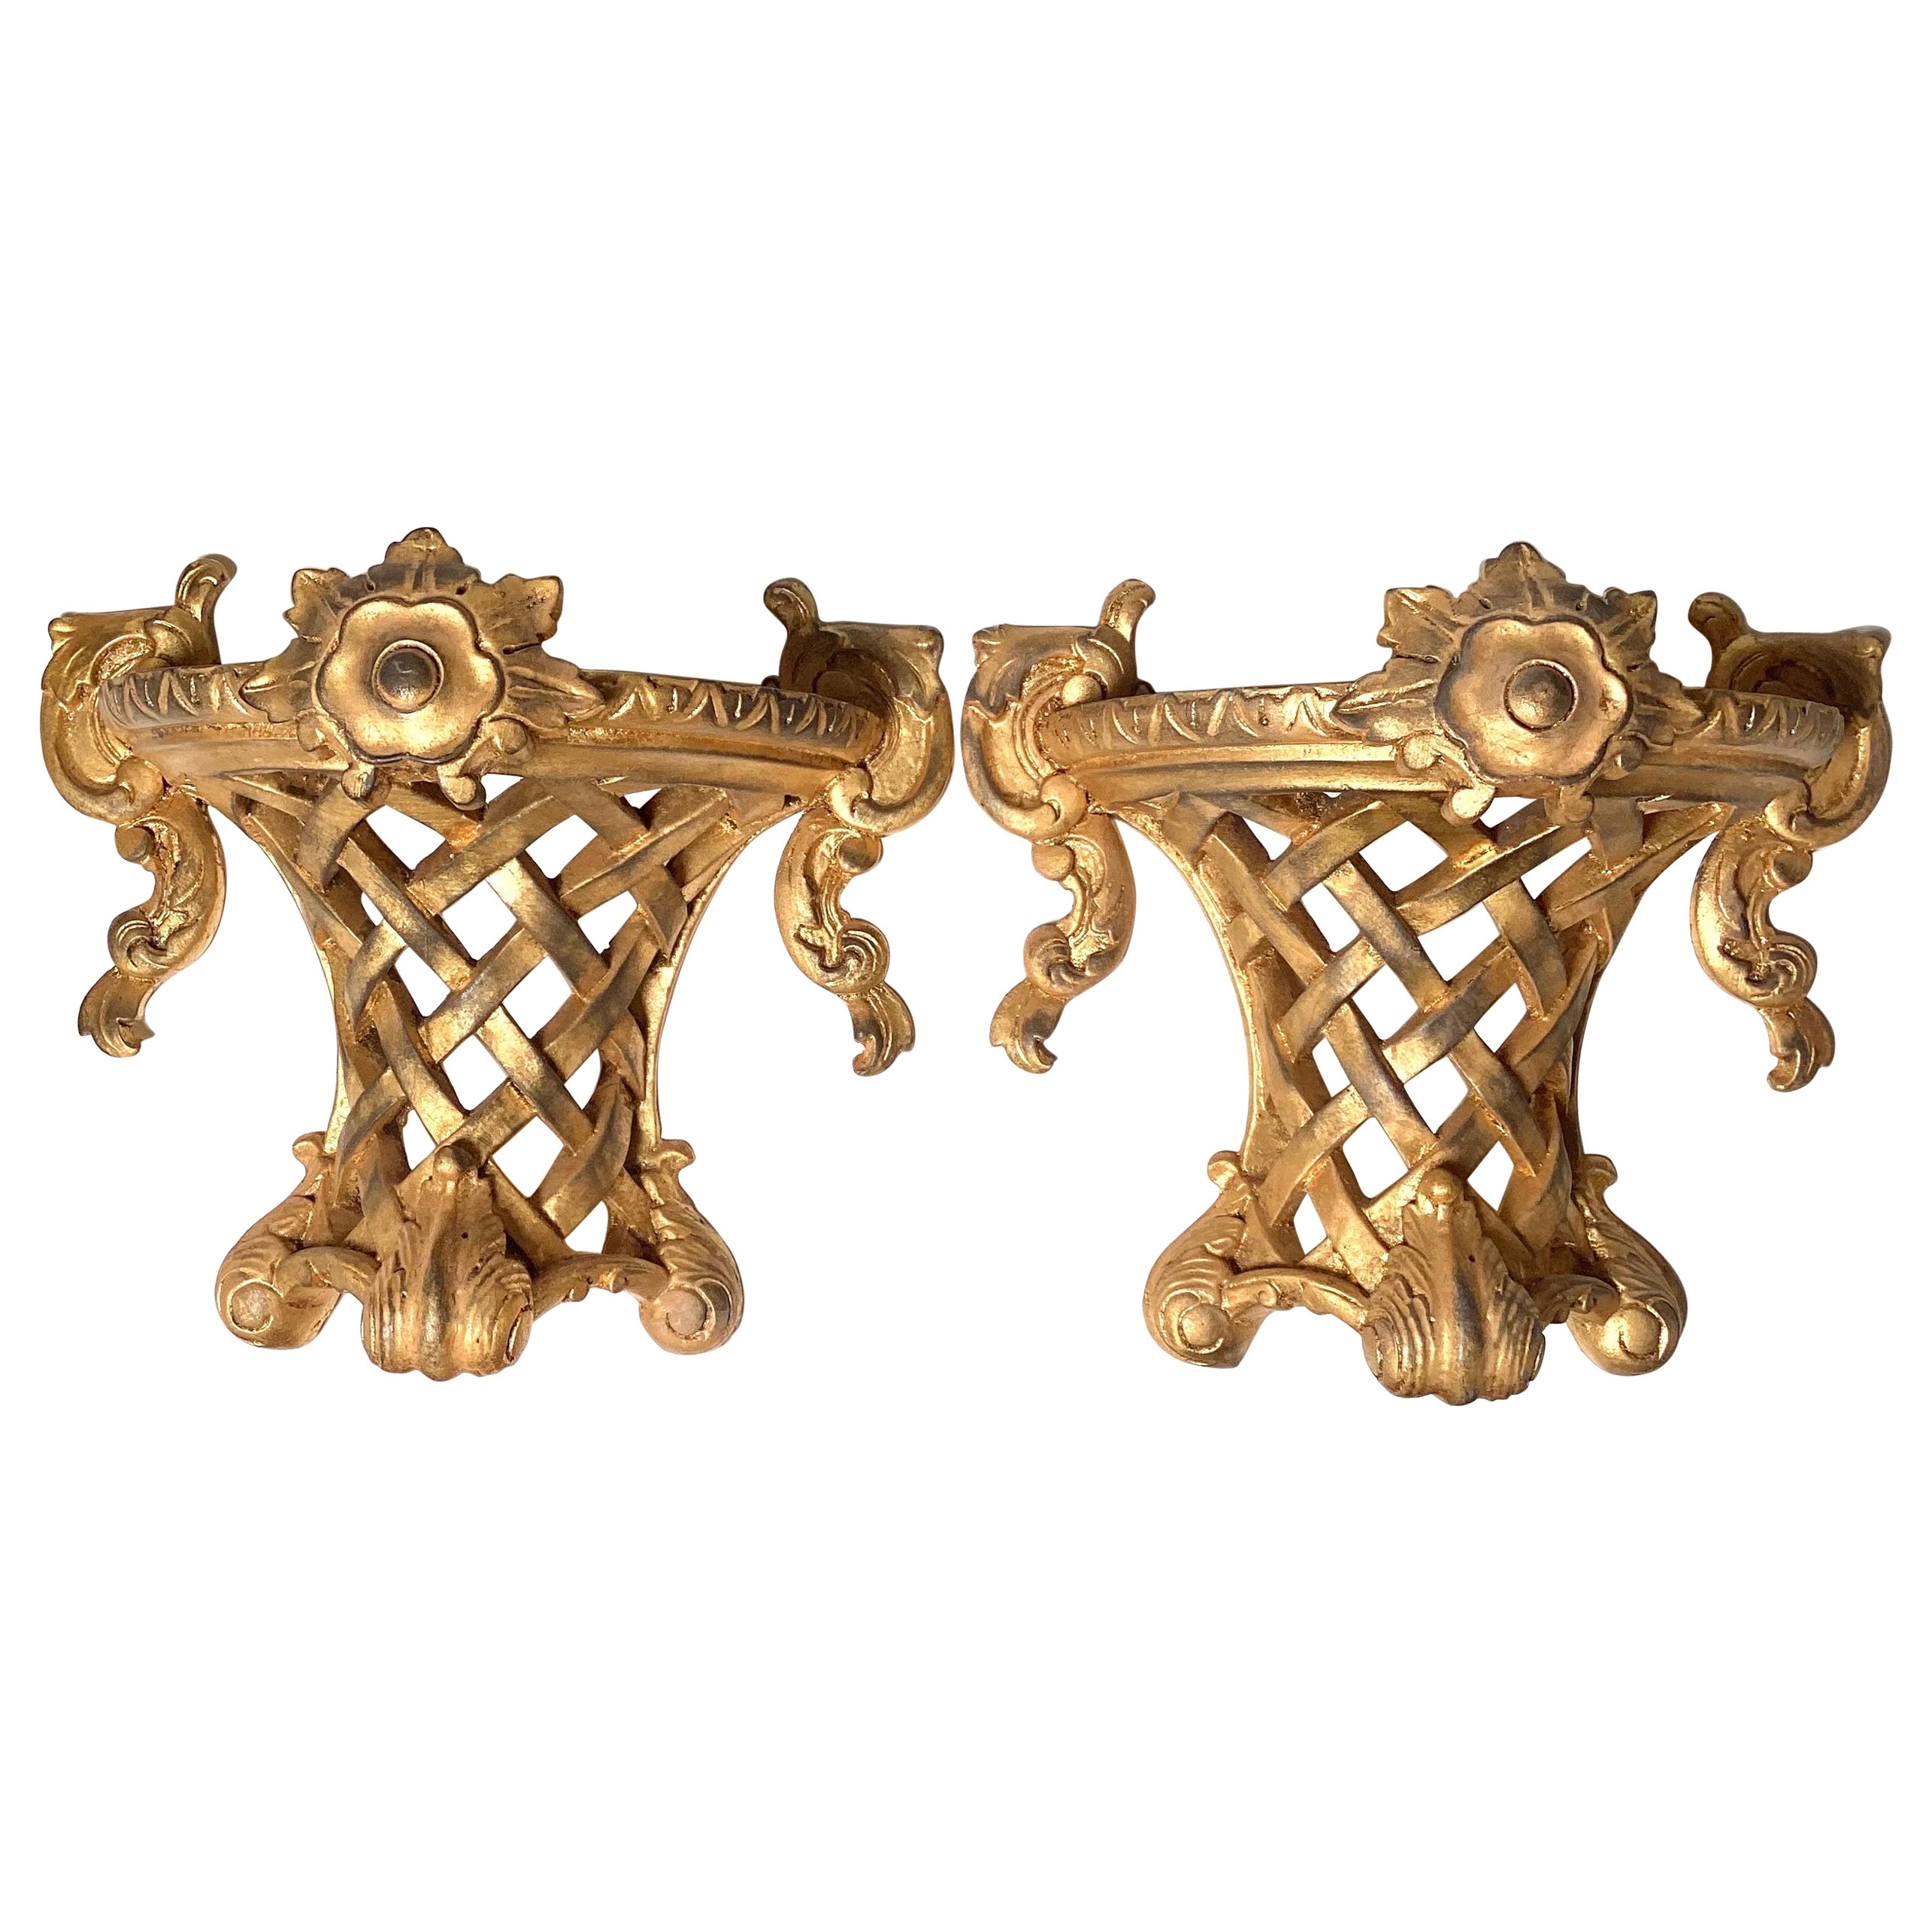 A Pair of Louis XV Style Gilt Wood Wall Shelves